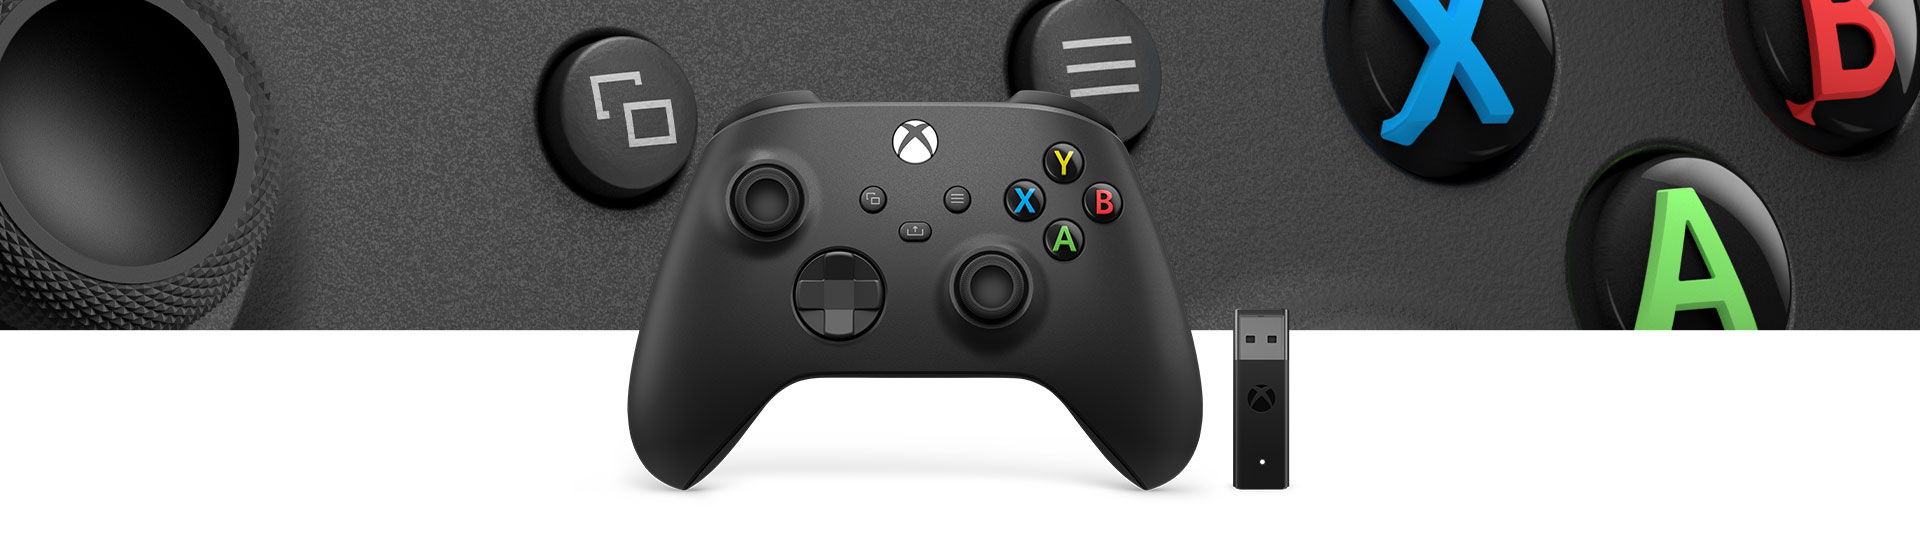 Xbox Wireless Controller + Wireless Adapter for Windows 10 with a close-up of controller surface texture